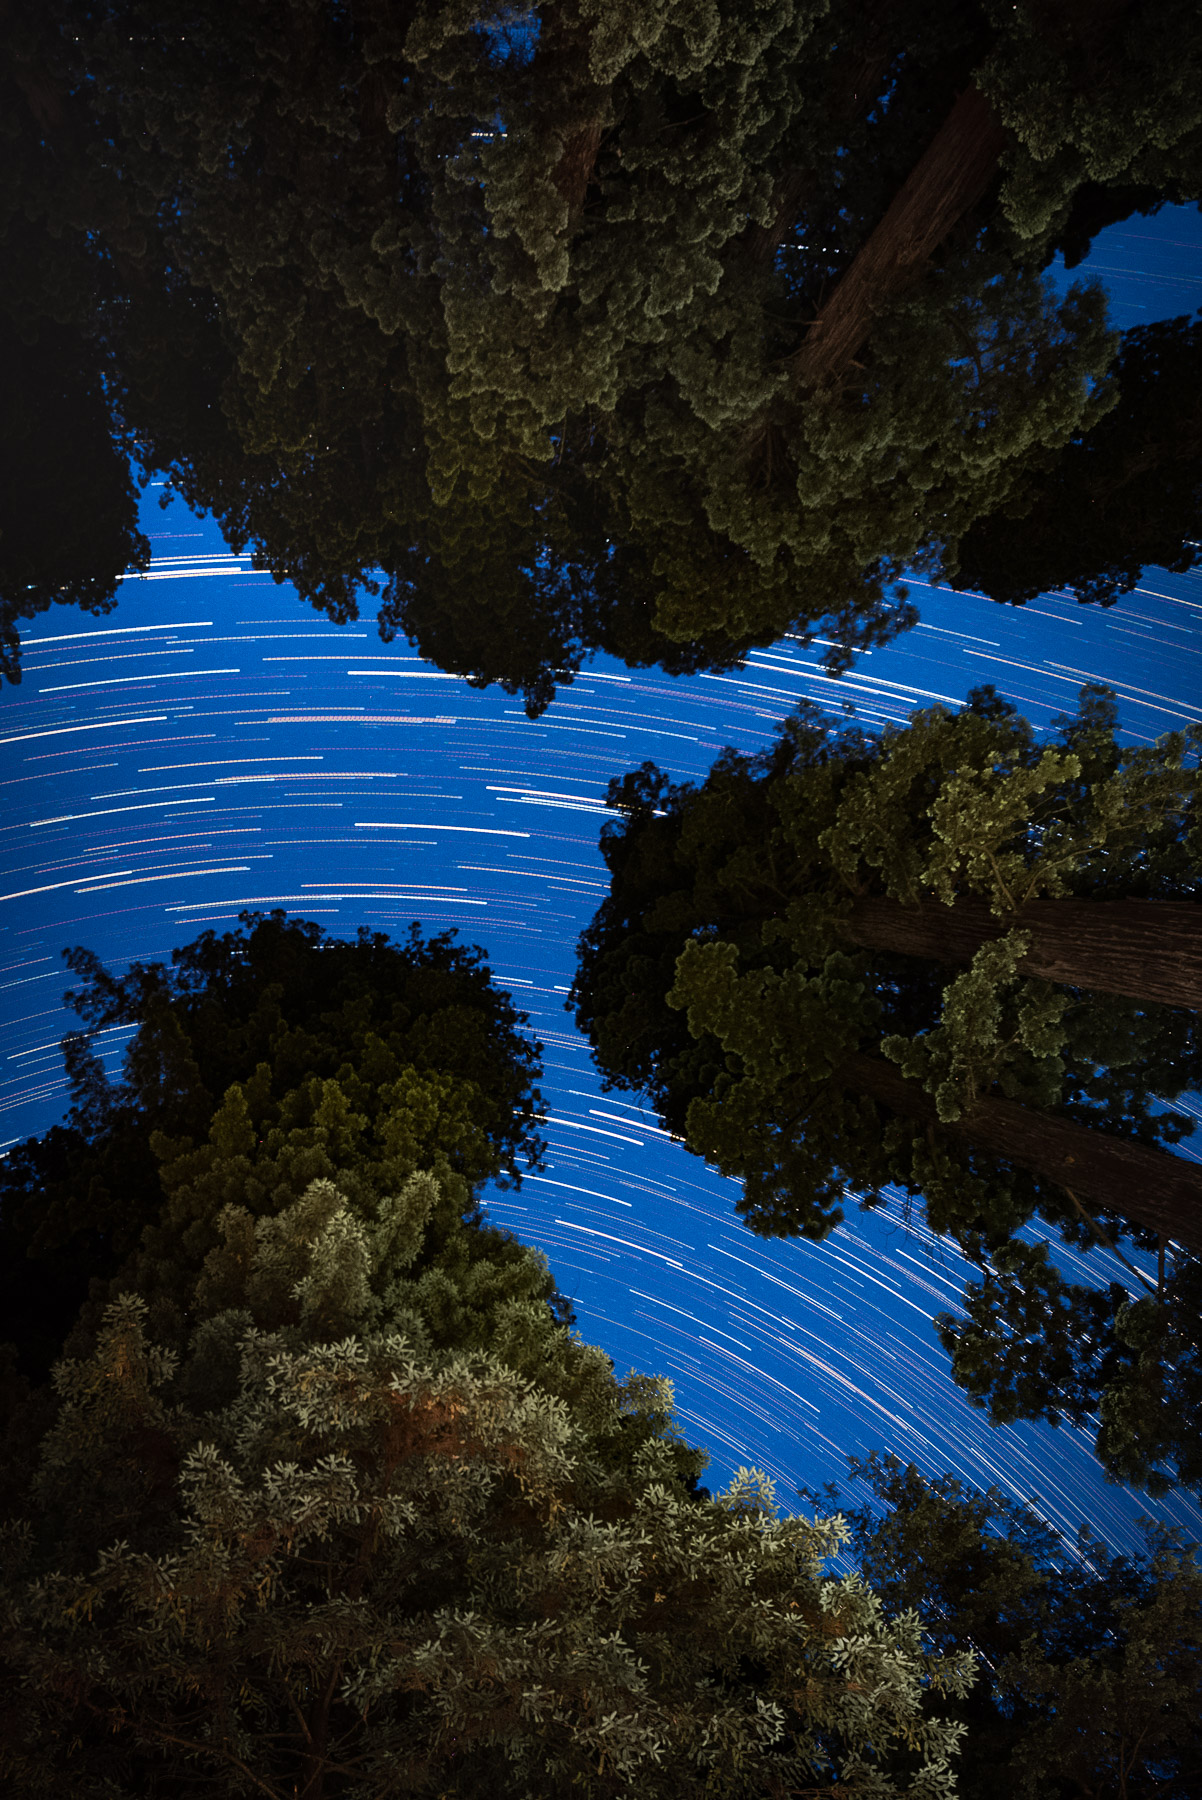 Star trails seen through the canopy of redwood trees.